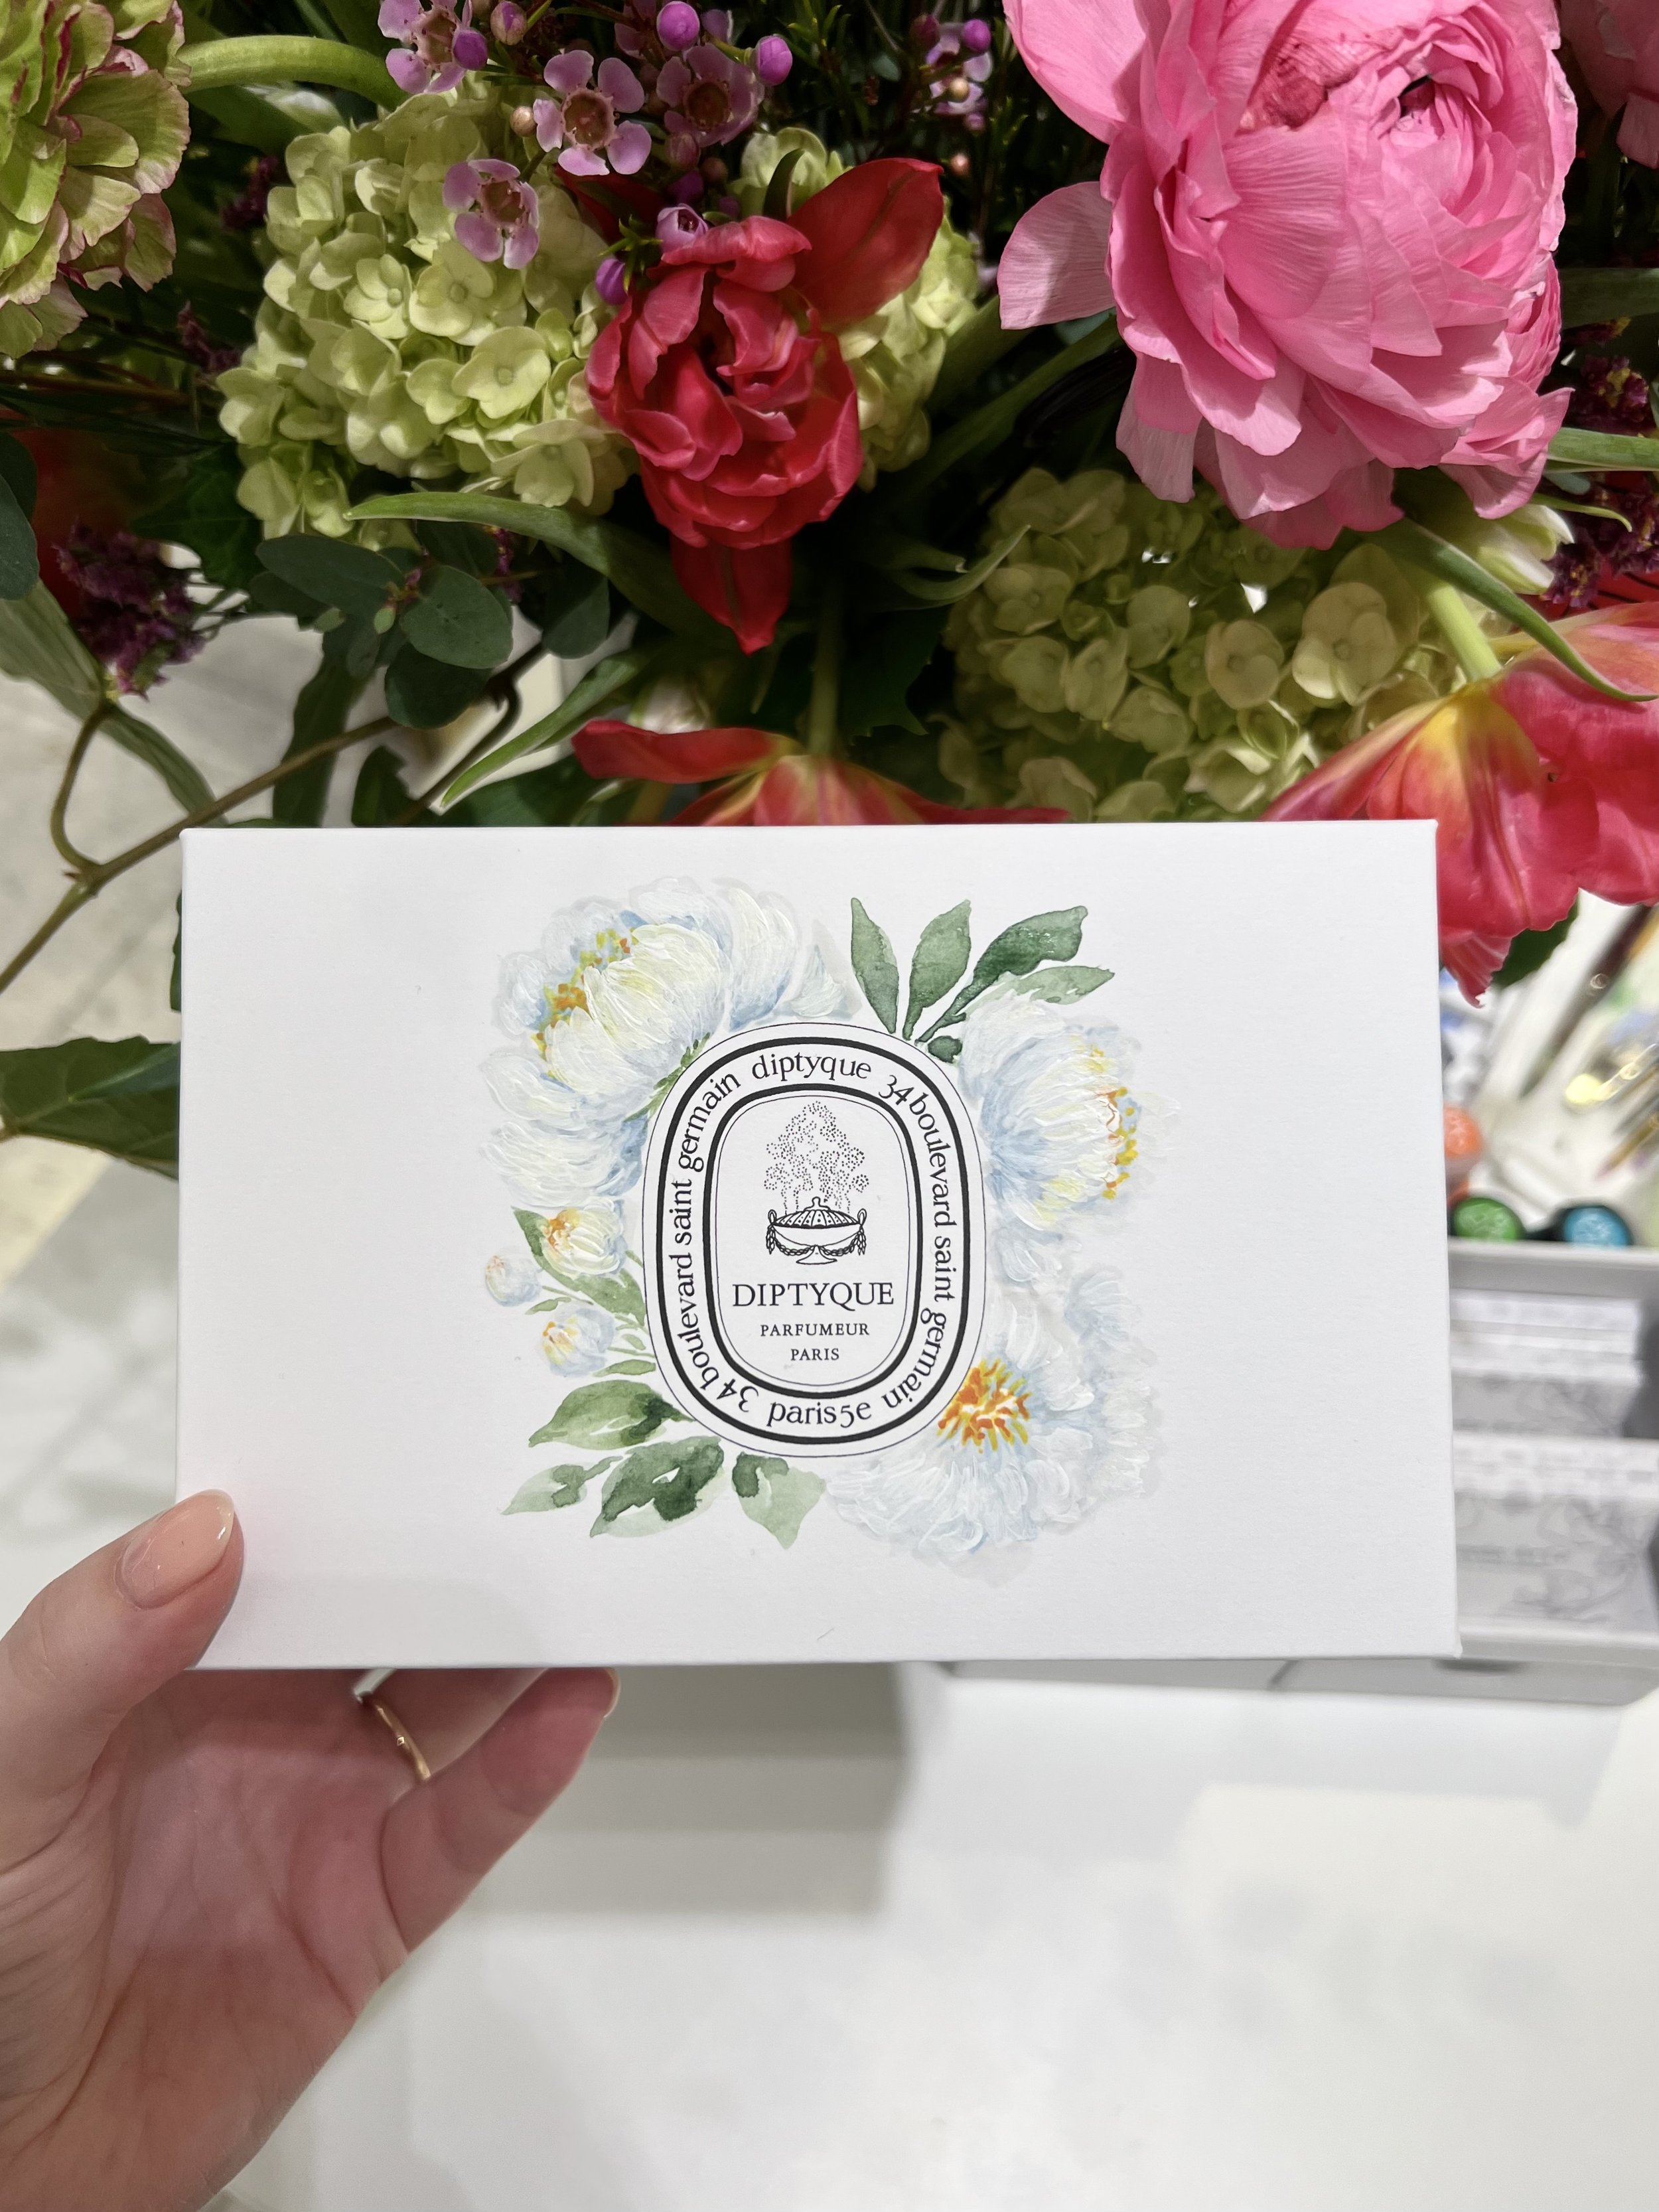 live-event-artist-holding-diptyque-box-with-white-peony-painting.jpeg